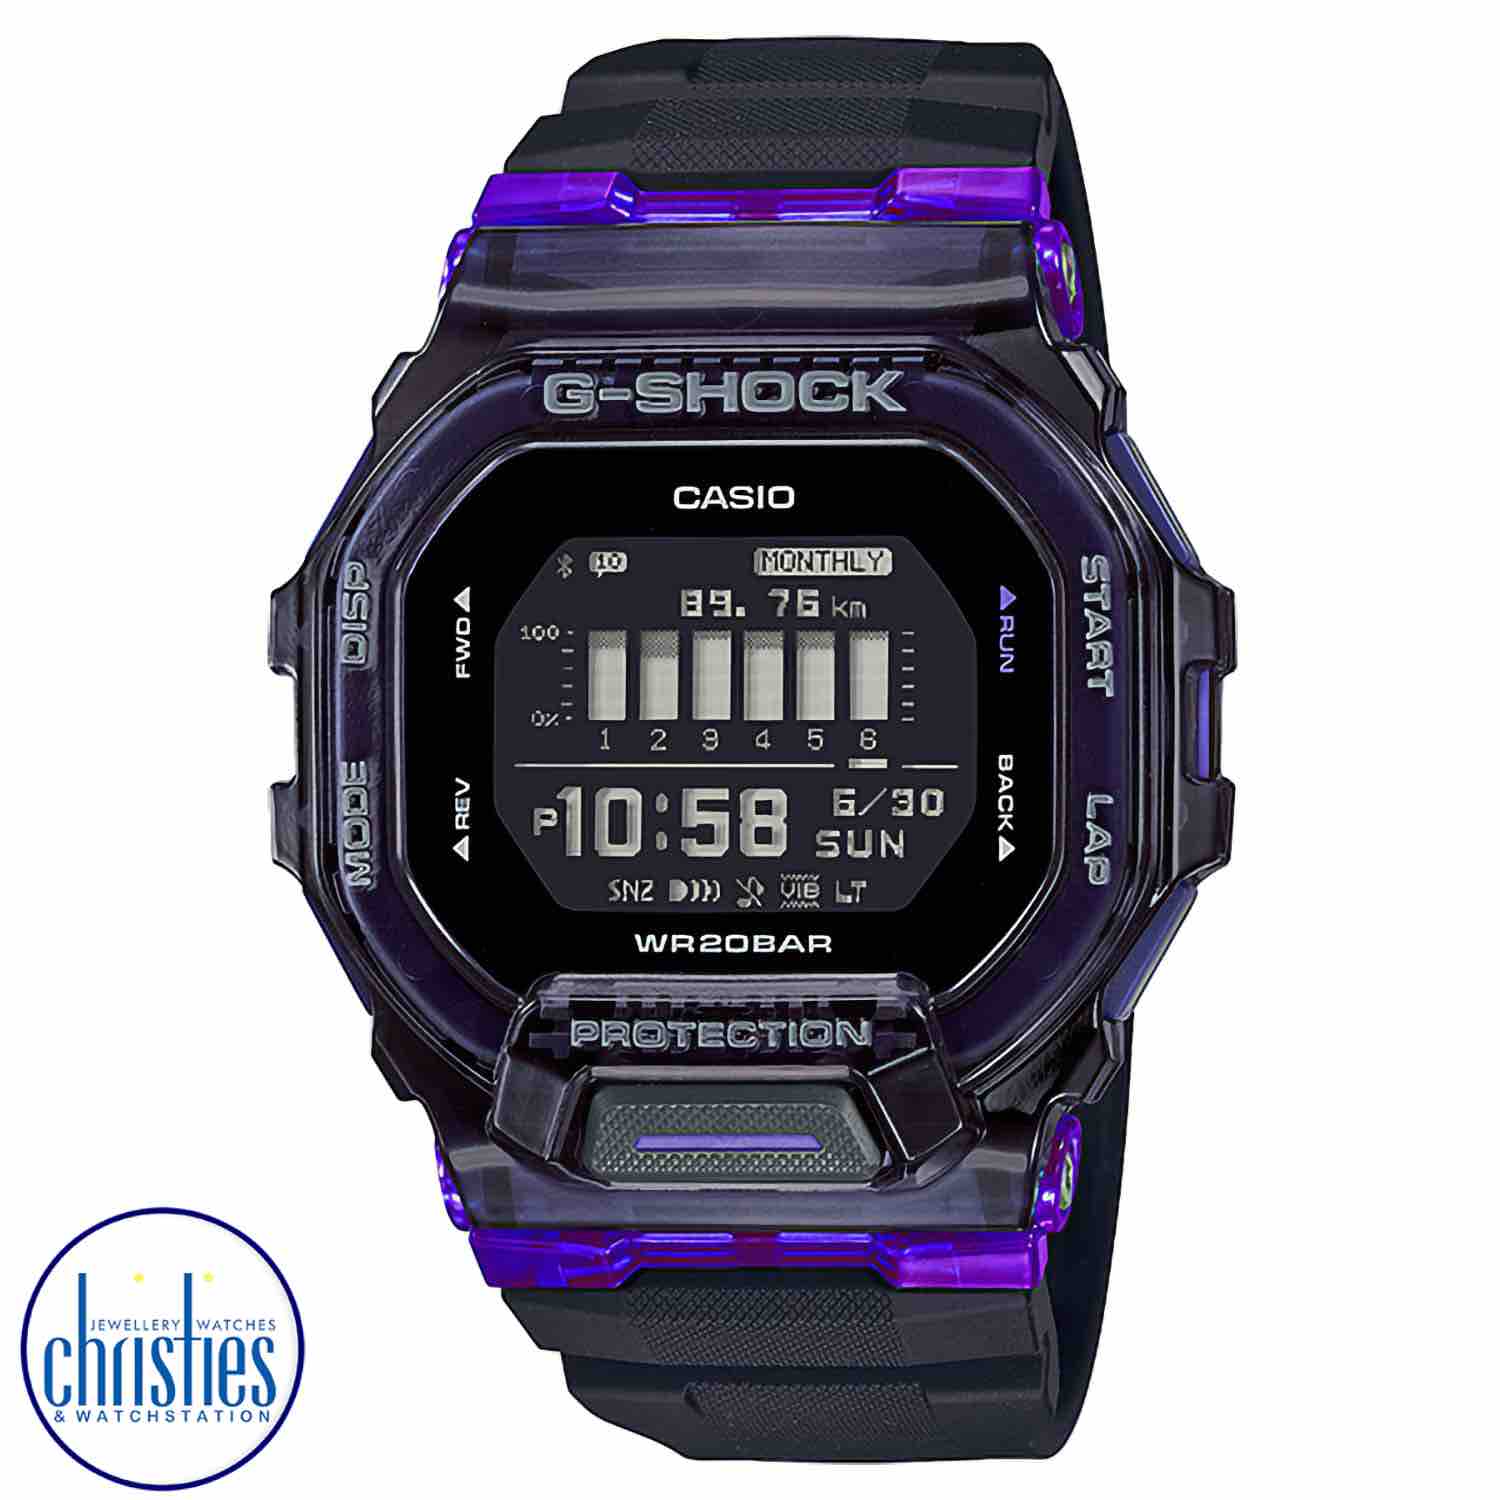 GBD200SM-1A6 Casio G-Shock G-SQUAD Watch g-shock watches pascoes